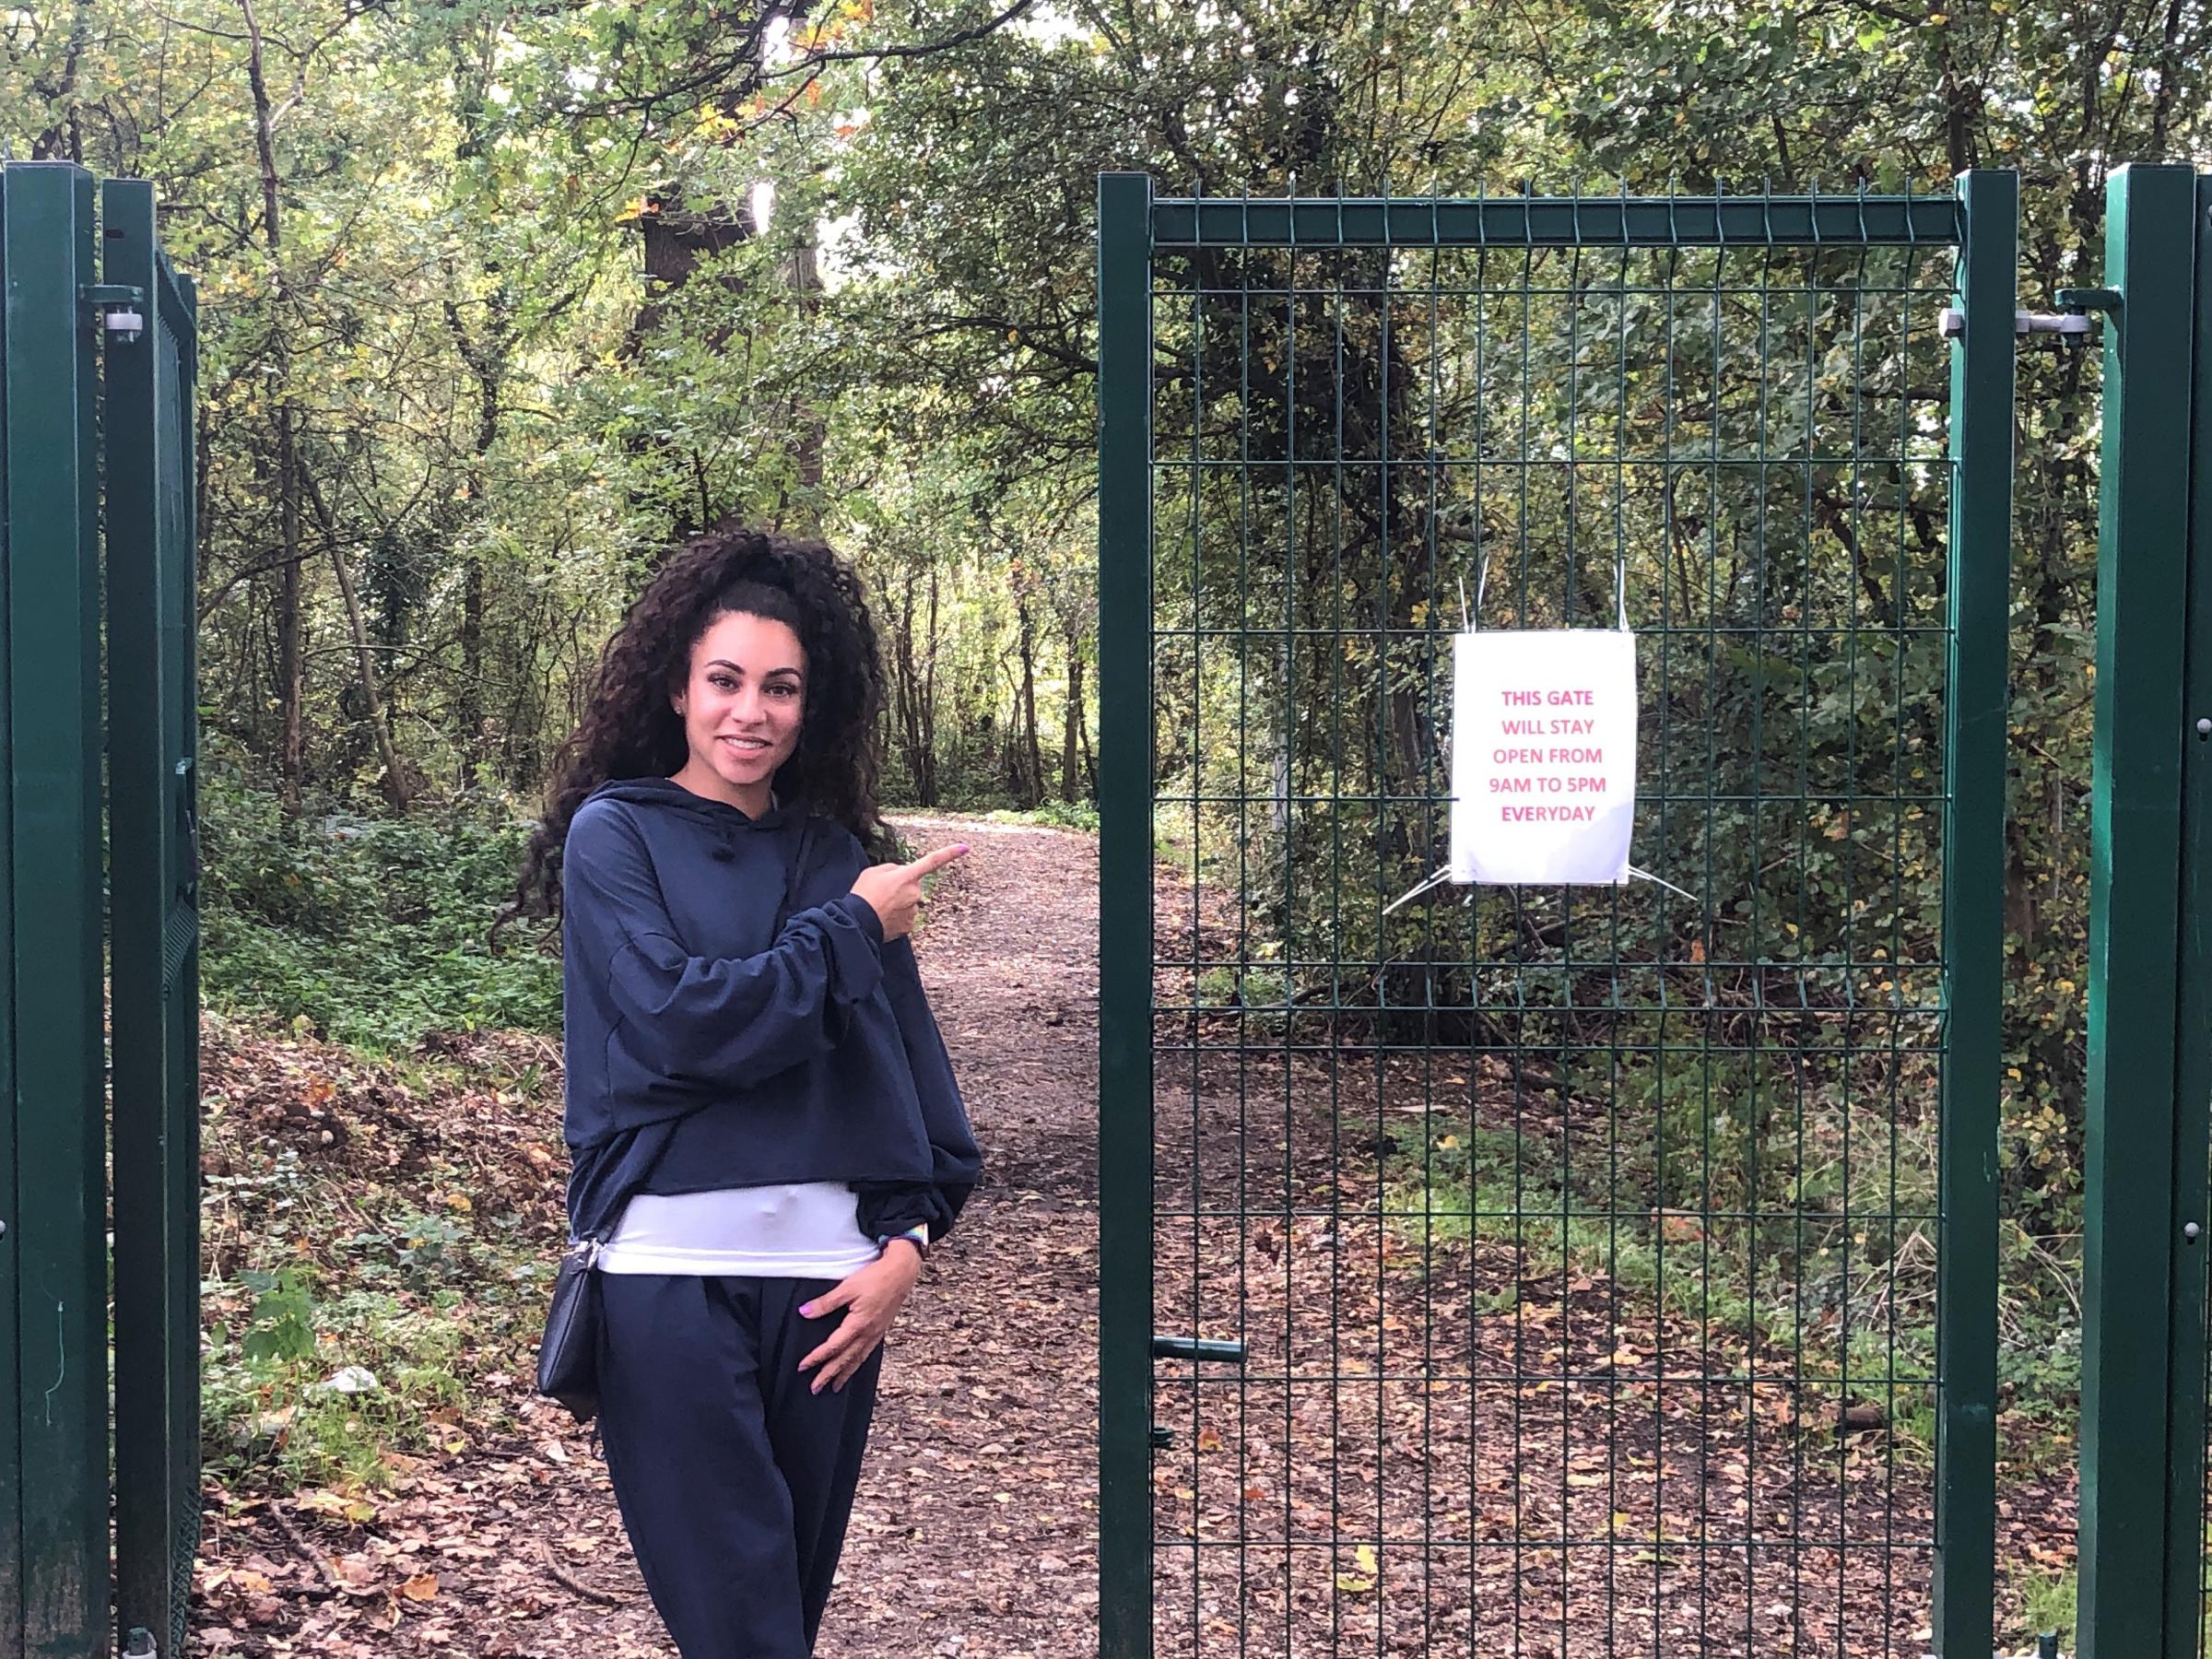 Cllr Clapper pictured at Aldenham Reservoir as part of a campaign to keep a reservoir walk open to the public